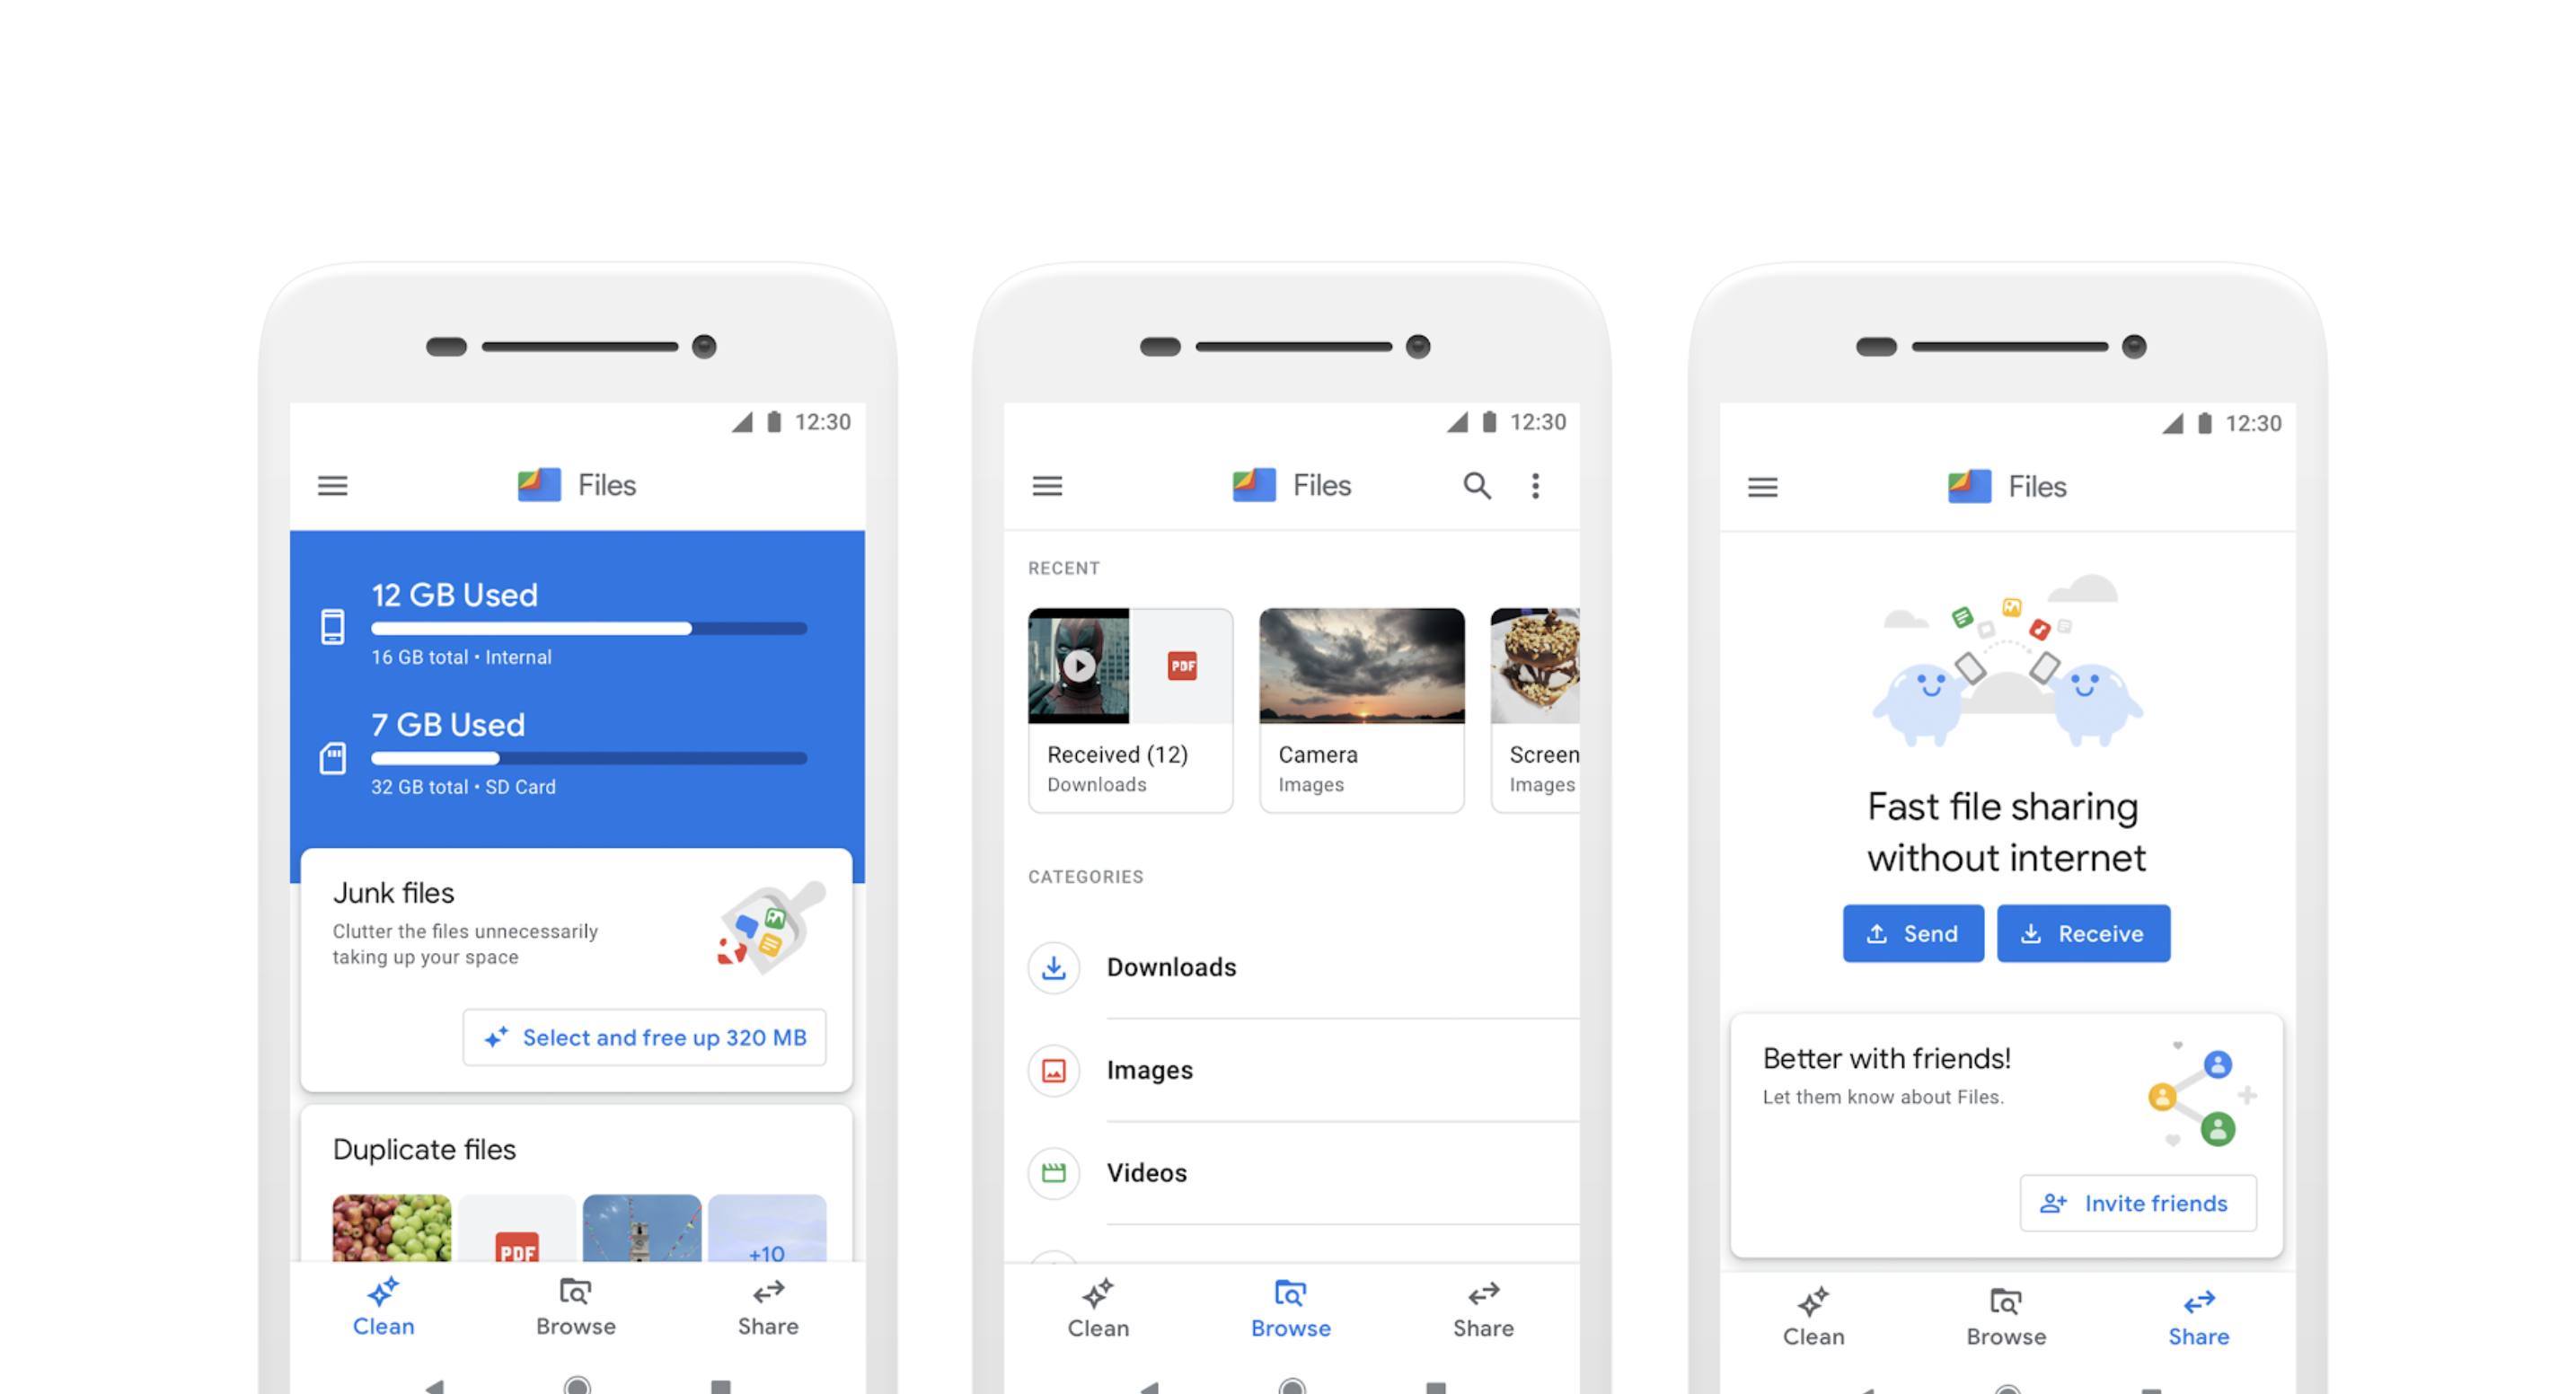 Google Files app new Smart Search feature can find text and documents within images